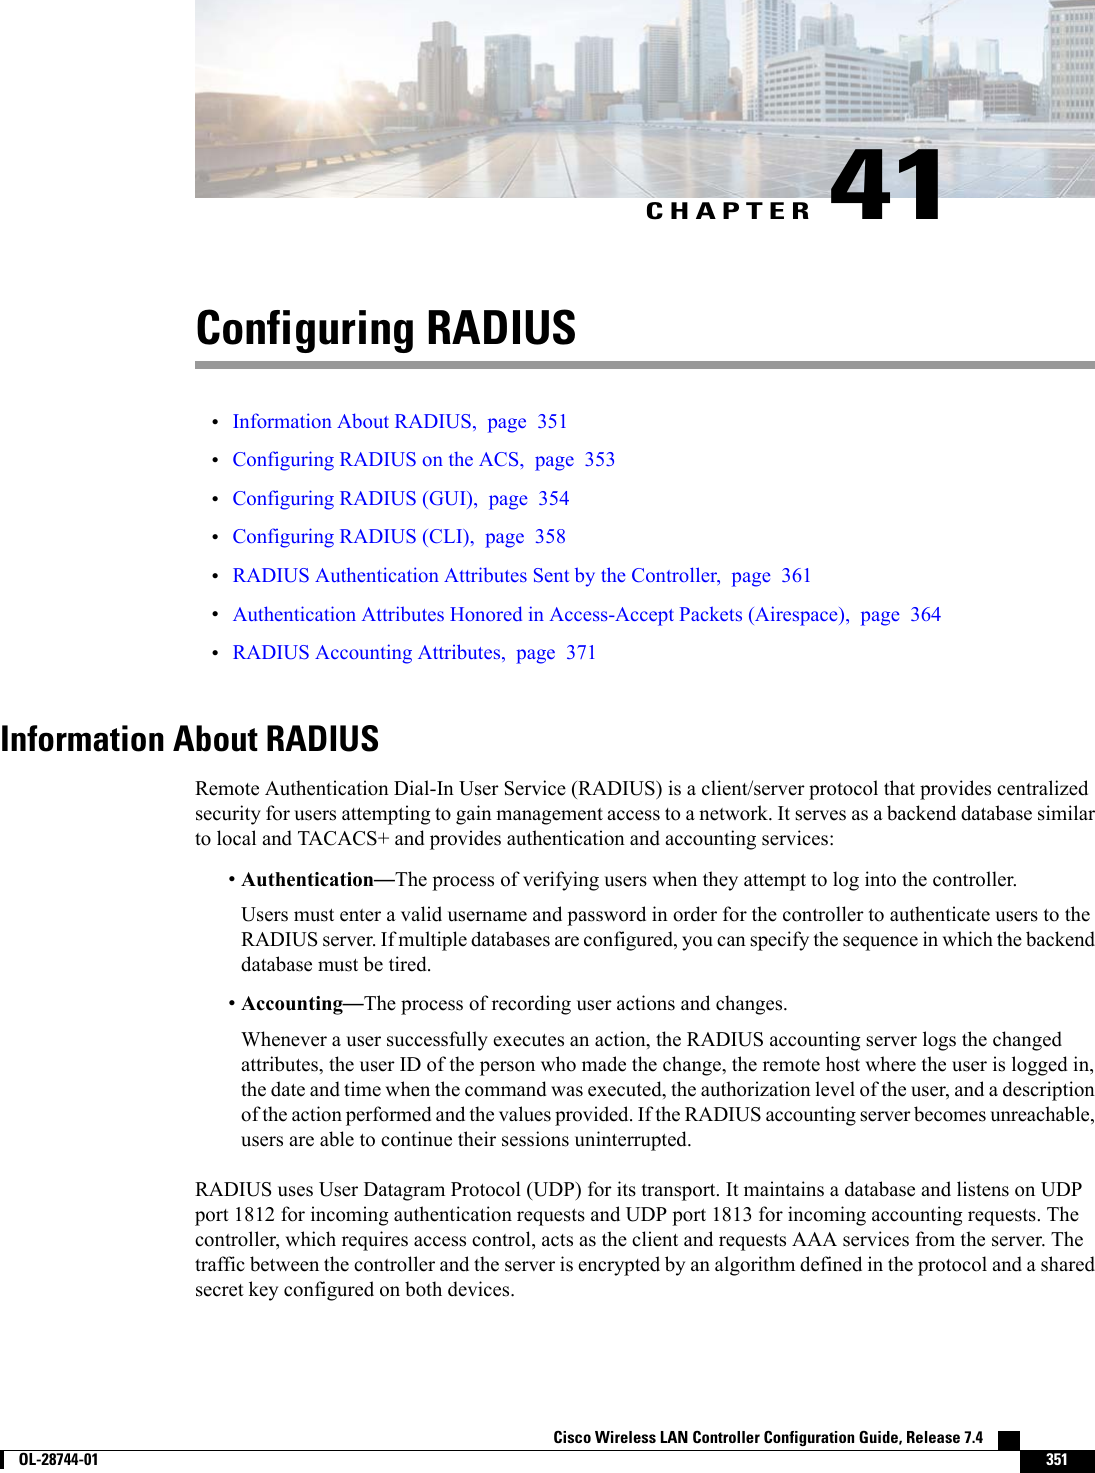 CHAPTER 41Configuring RADIUS•Information About RADIUS, page 351•Configuring RADIUS on the ACS, page 353•Configuring RADIUS (GUI), page 354•Configuring RADIUS (CLI), page 358•RADIUS Authentication Attributes Sent by the Controller, page 361•Authentication Attributes Honored in Access-Accept Packets (Airespace), page 364•RADIUS Accounting Attributes, page 371Information About RADIUSRemote Authentication Dial-In User Service (RADIUS) is a client/server protocol that provides centralizedsecurity for users attempting to gain management access to a network. It serves as a backend database similarto local and TACACS+ and provides authentication and accounting services:•Authentication—The process of verifying users when they attempt to log into the controller.Users must enter a valid username and password in order for the controller to authenticate users to theRADIUS server. If multiple databases are configured, you can specify the sequence in which the backenddatabase must be tired.•Accounting—The process of recording user actions and changes.Whenever a user successfully executes an action, the RADIUS accounting server logs the changedattributes, the user ID of the person who made the change, the remote host where the user is logged in,the date and time when the command was executed, the authorization level of the user, and a descriptionof the action performed and the values provided. If the RADIUS accounting server becomes unreachable,users are able to continue their sessions uninterrupted.RADIUS uses User Datagram Protocol (UDP) for its transport. It maintains a database and listens on UDPport 1812 for incoming authentication requests and UDP port 1813 for incoming accounting requests. Thecontroller, which requires access control, acts as the client and requests AAA services from the server. Thetraffic between the controller and the server is encrypted by an algorithm defined in the protocol and a sharedsecret key configured on both devices.Cisco Wireless LAN Controller Configuration Guide, Release 7.4        OL-28744-01 351